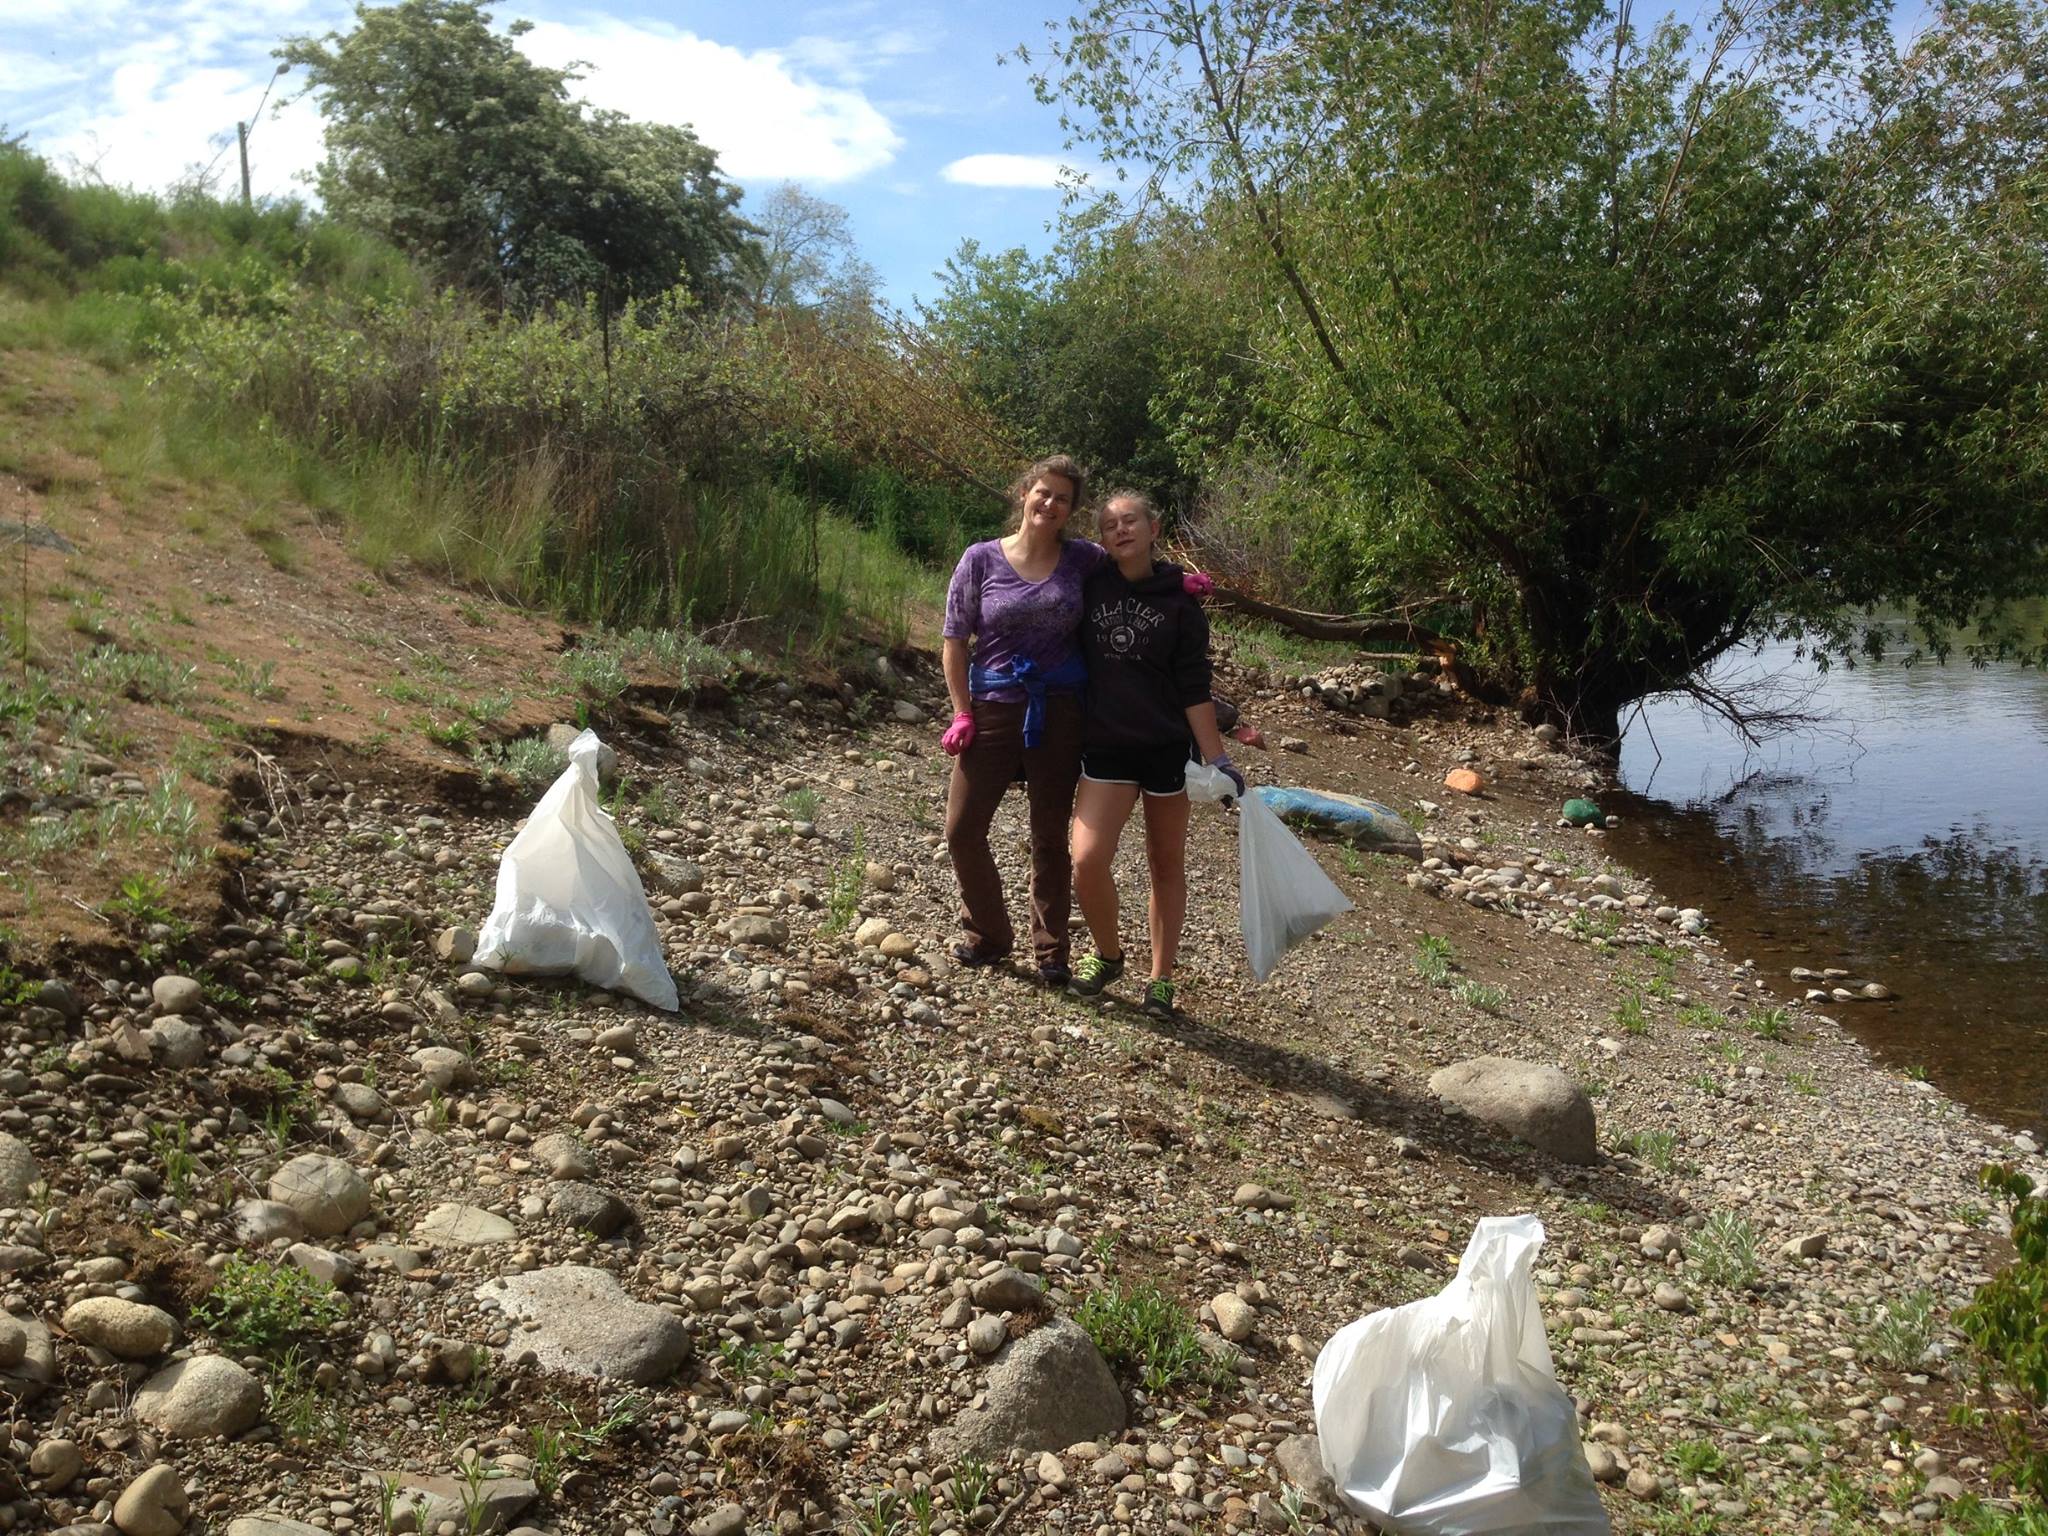 River Cleanup continues with Temple Beth Shalom